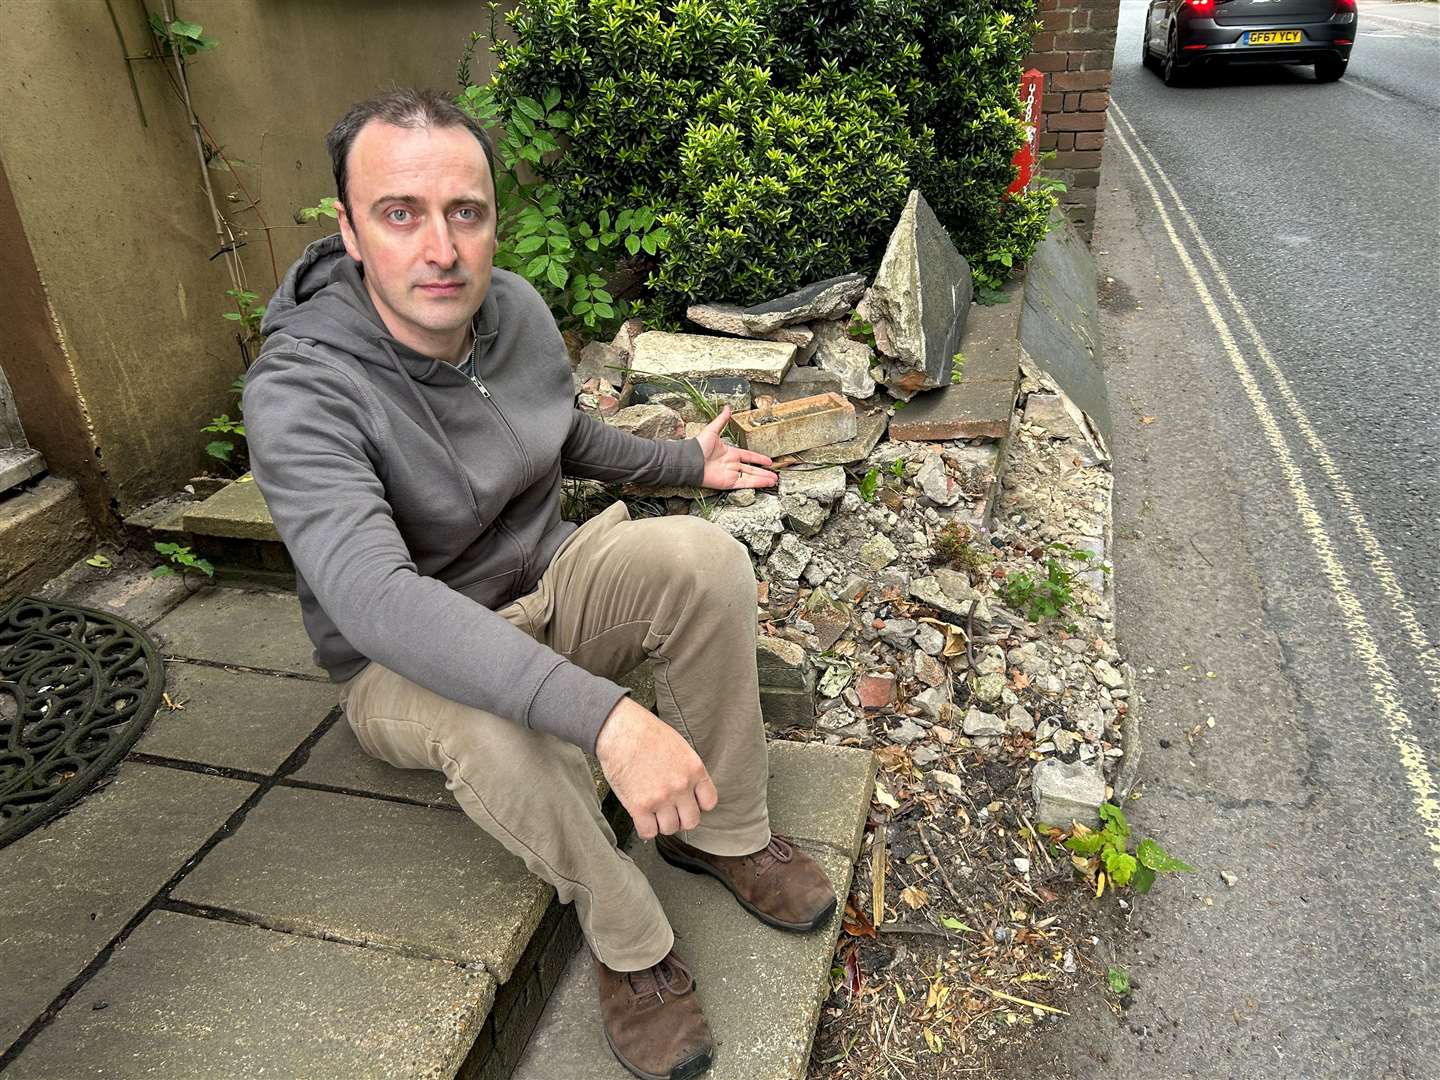 Dr Tom Nichols with his neighbour’s wall, which was destroyed by a car